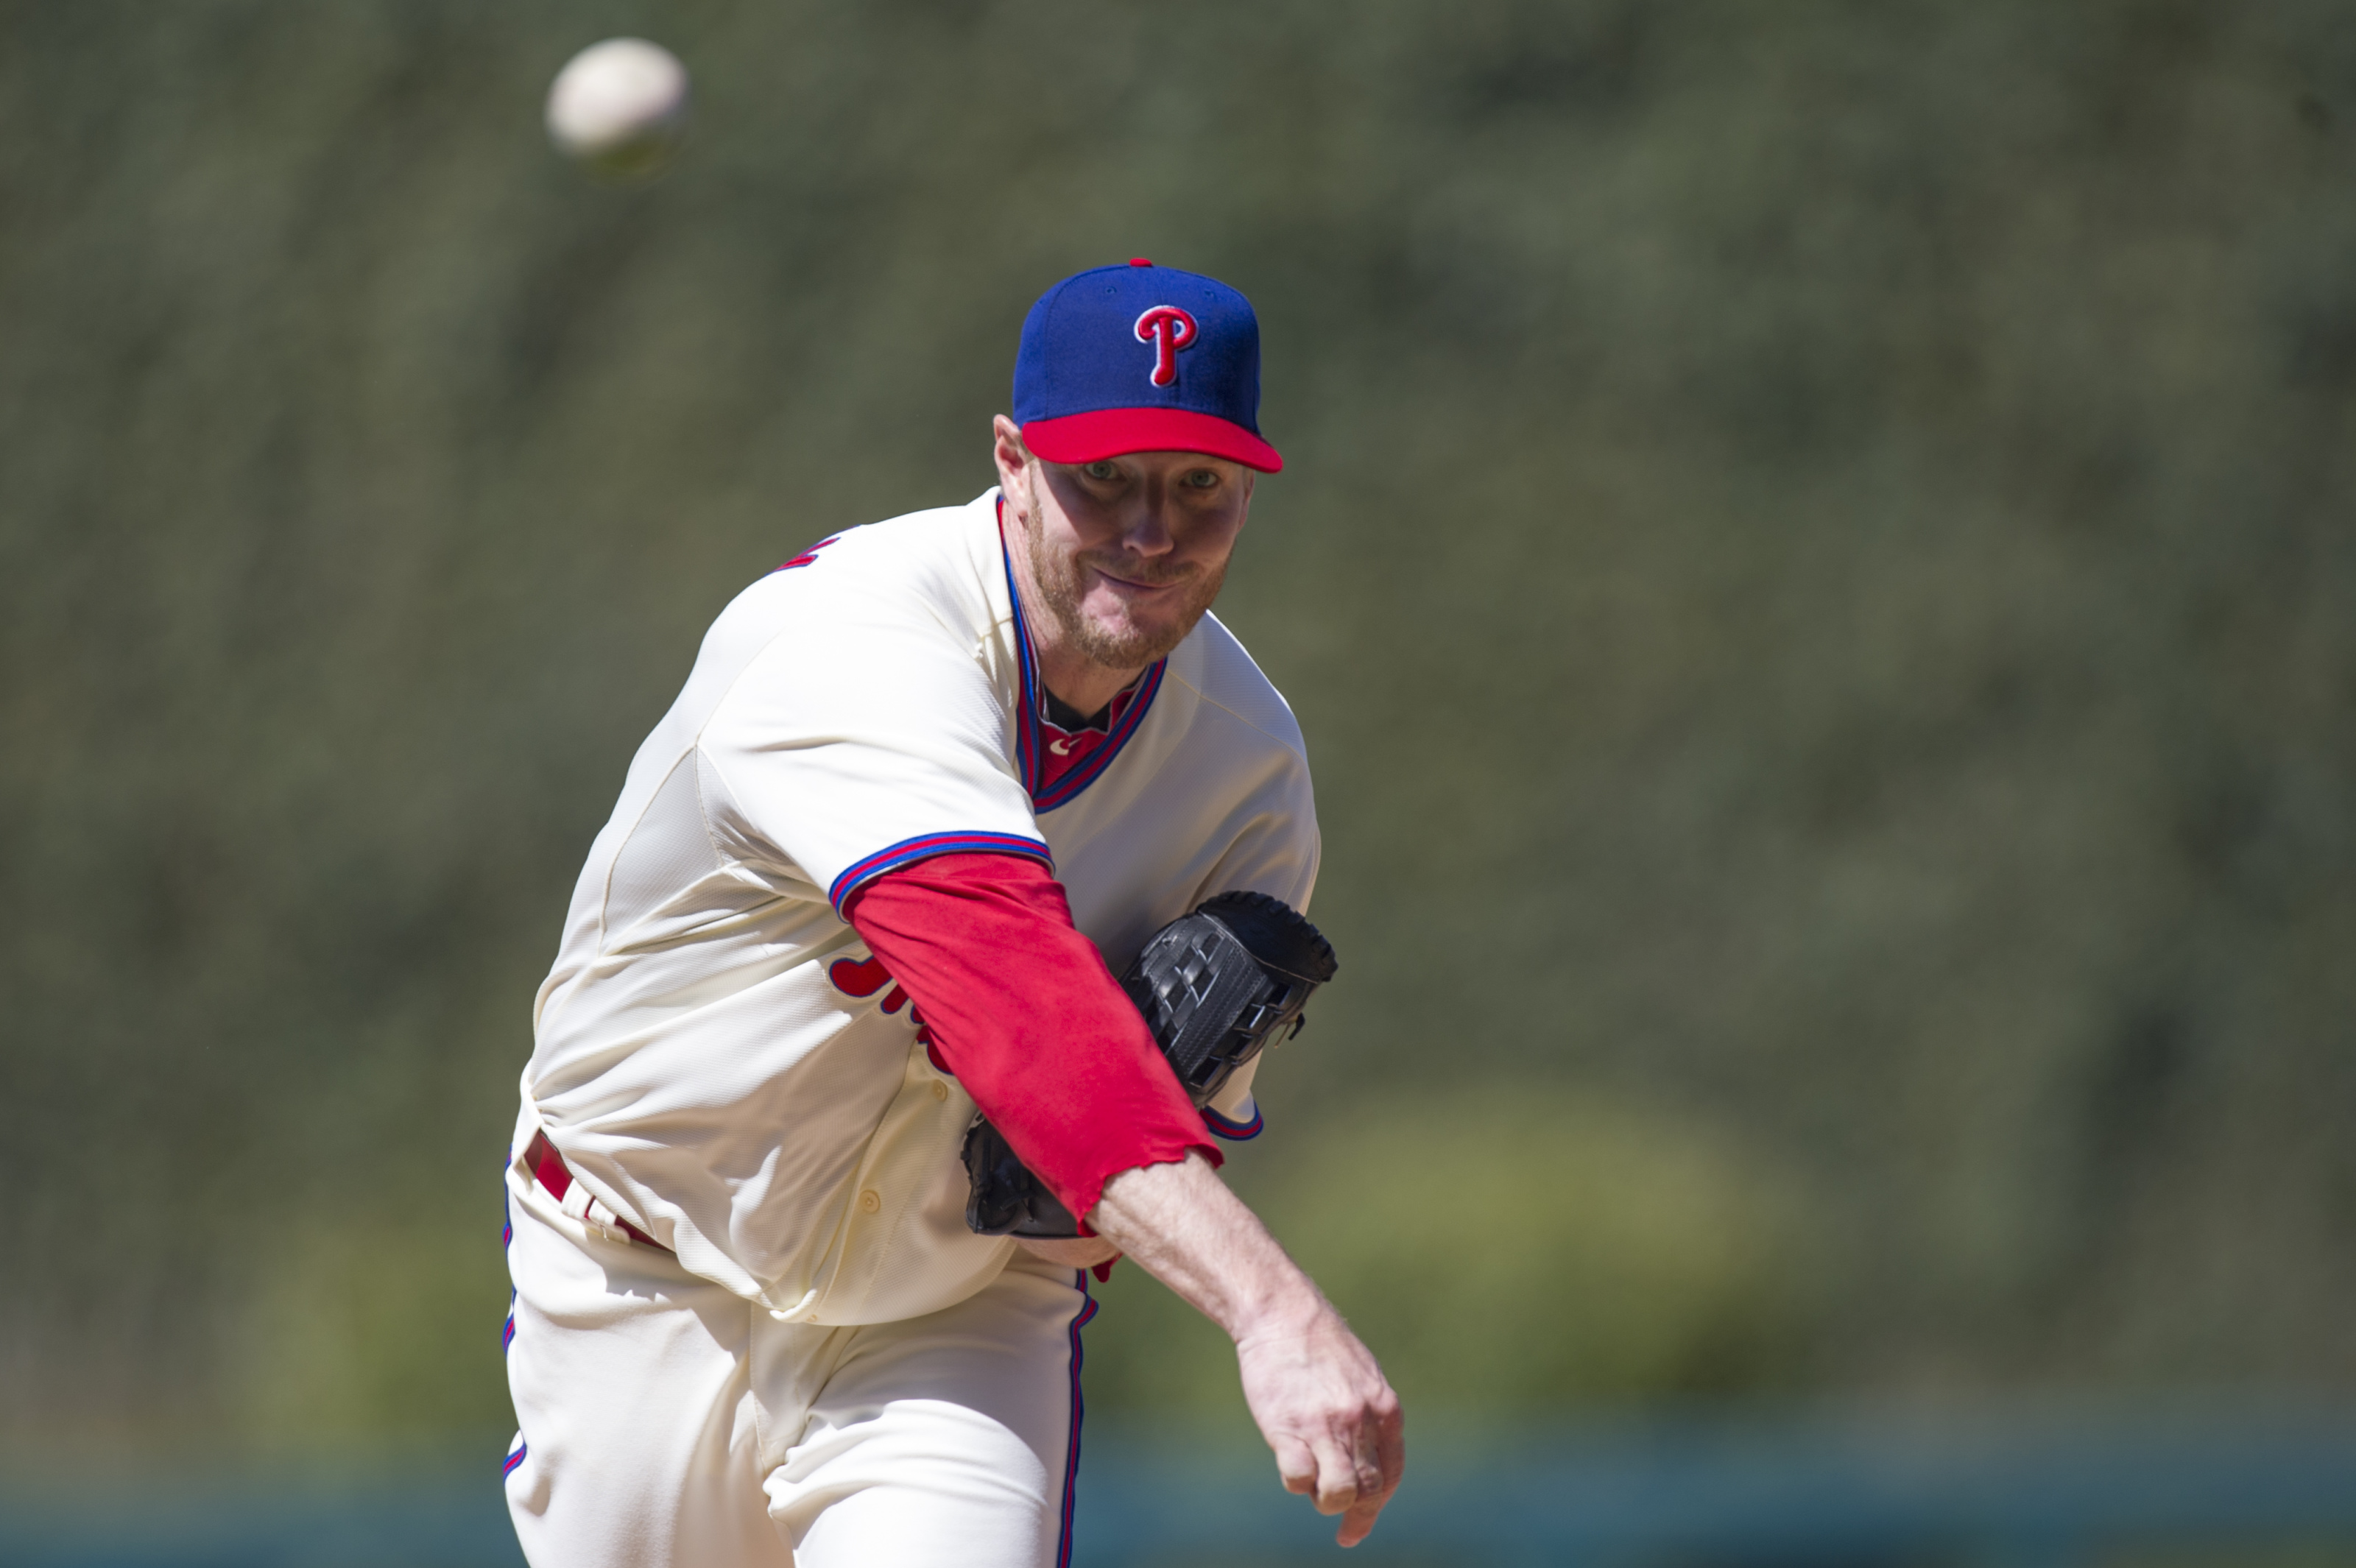 Philadelphia Phillies ace Roy Halladay throws perfect game against